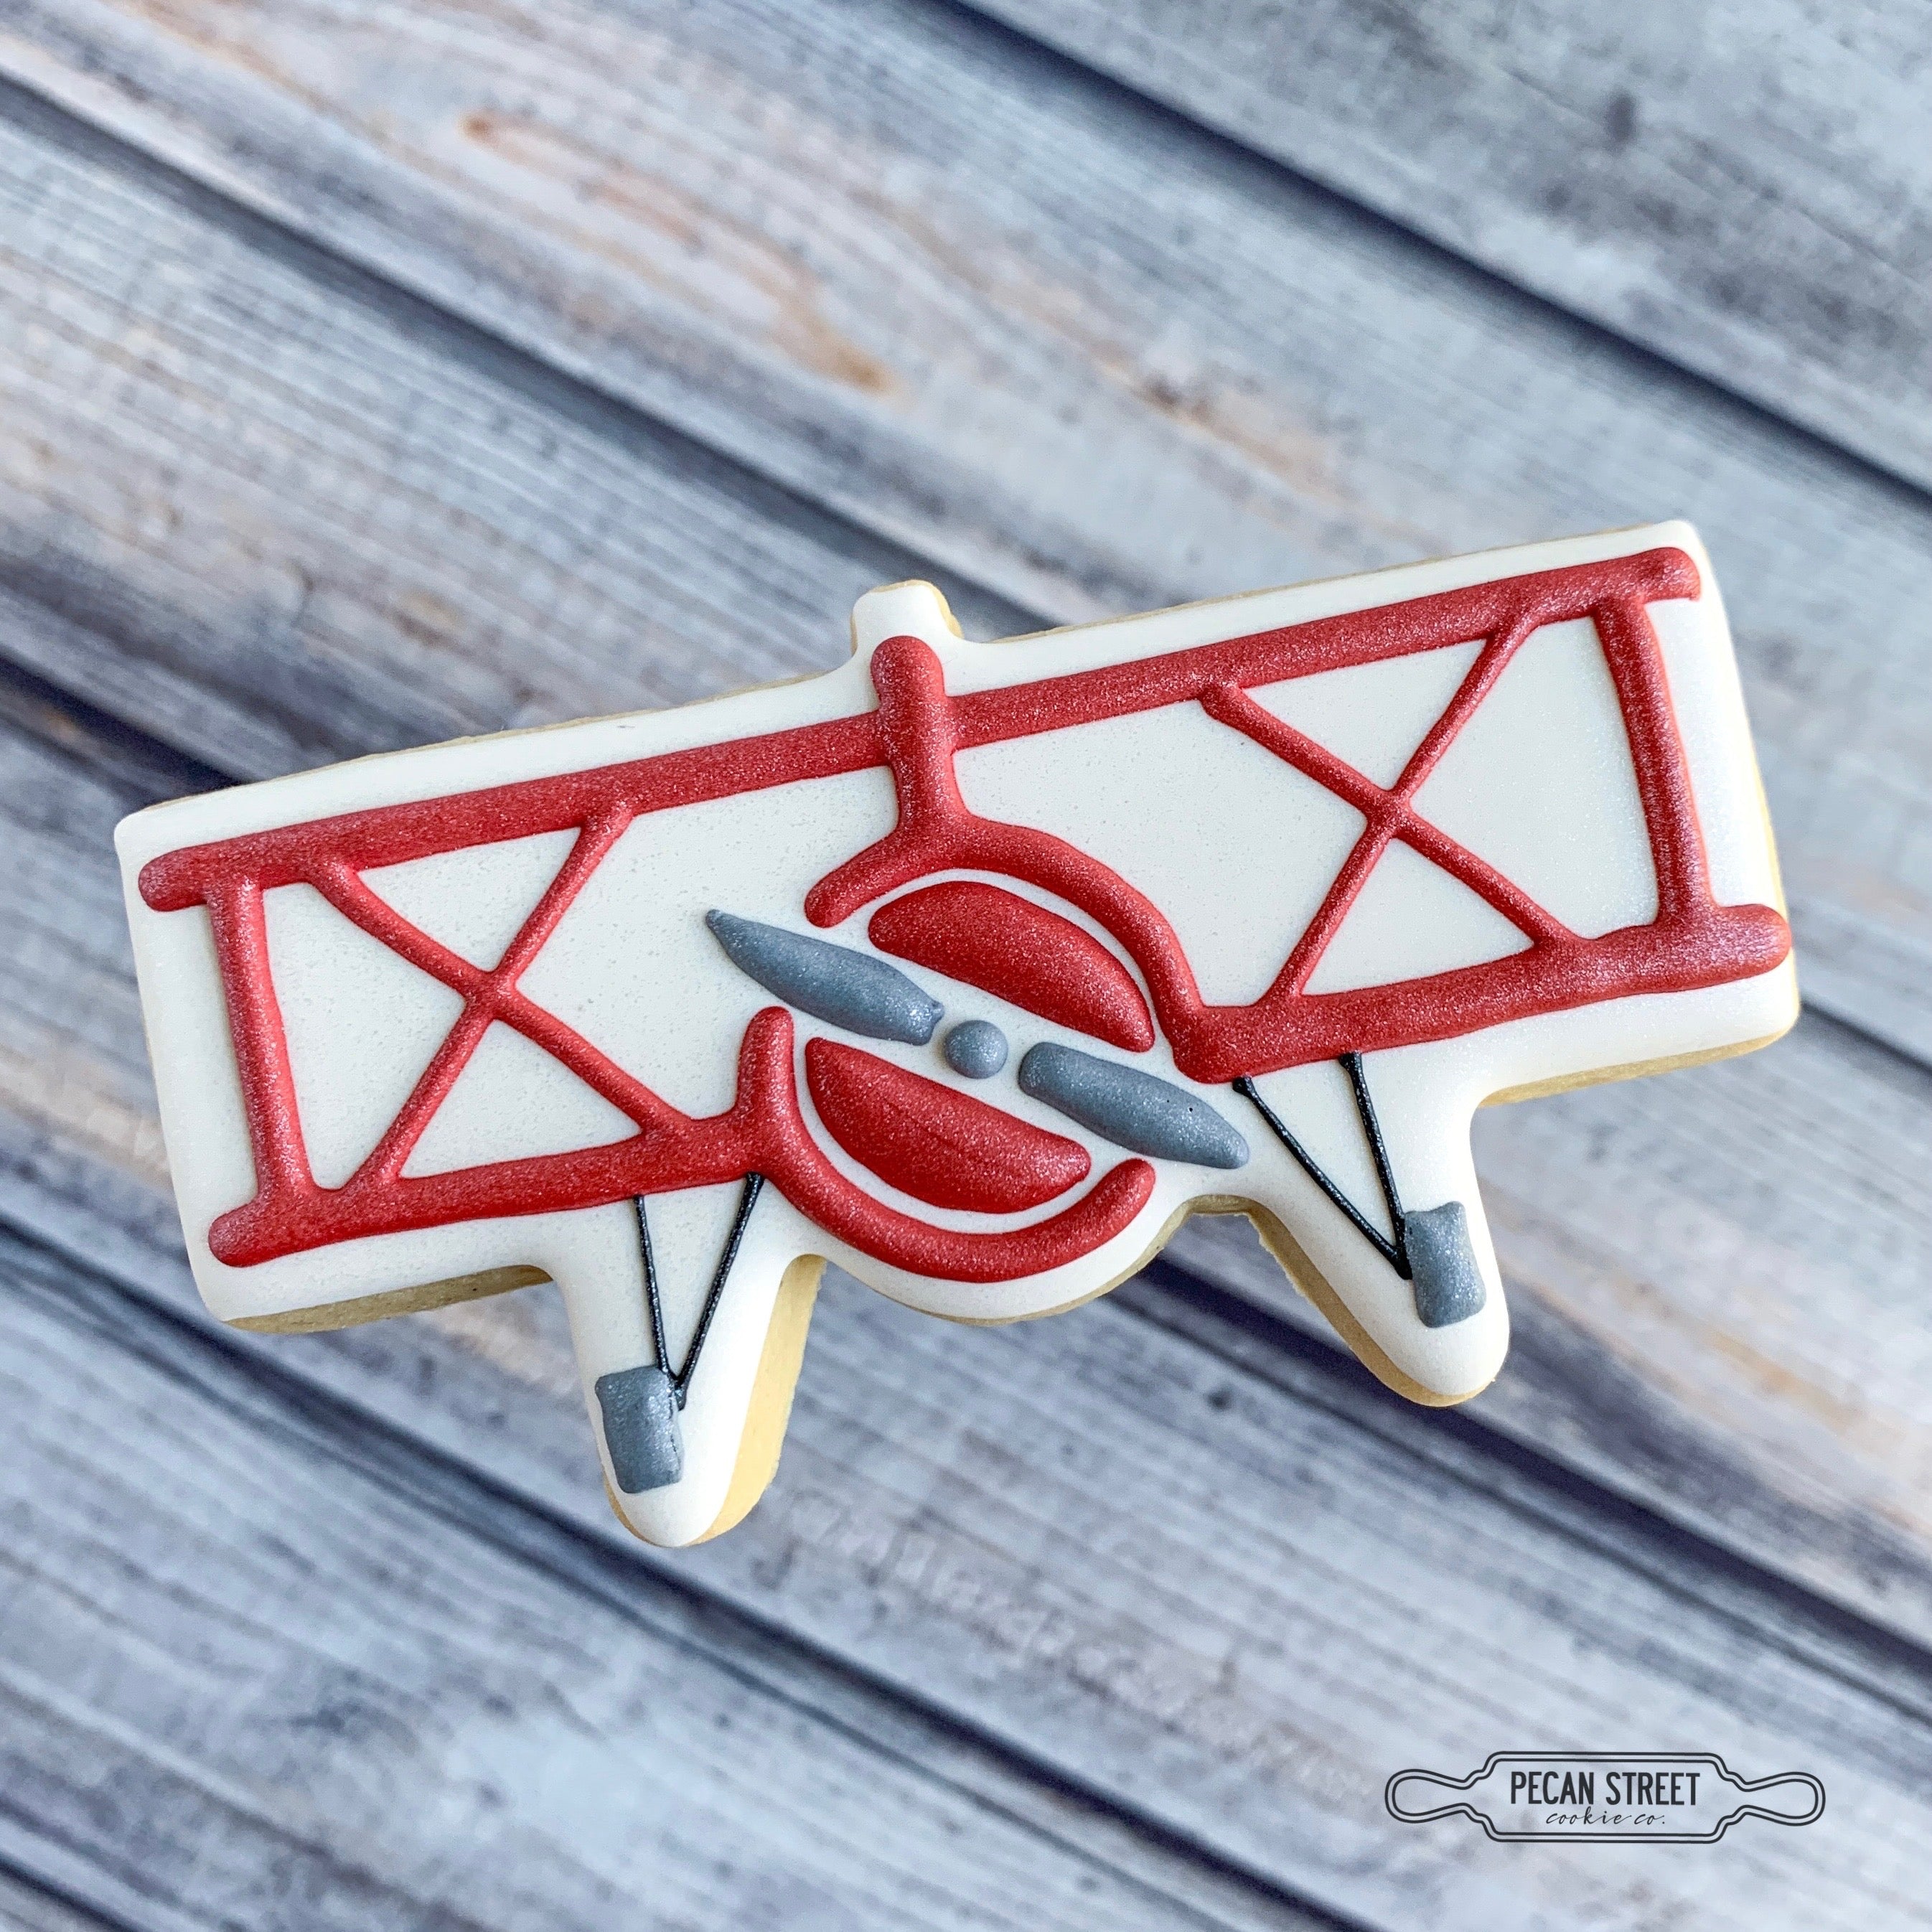 Fly Fishing Lure Cookie Cutter – Pecan Street Cookie Co.